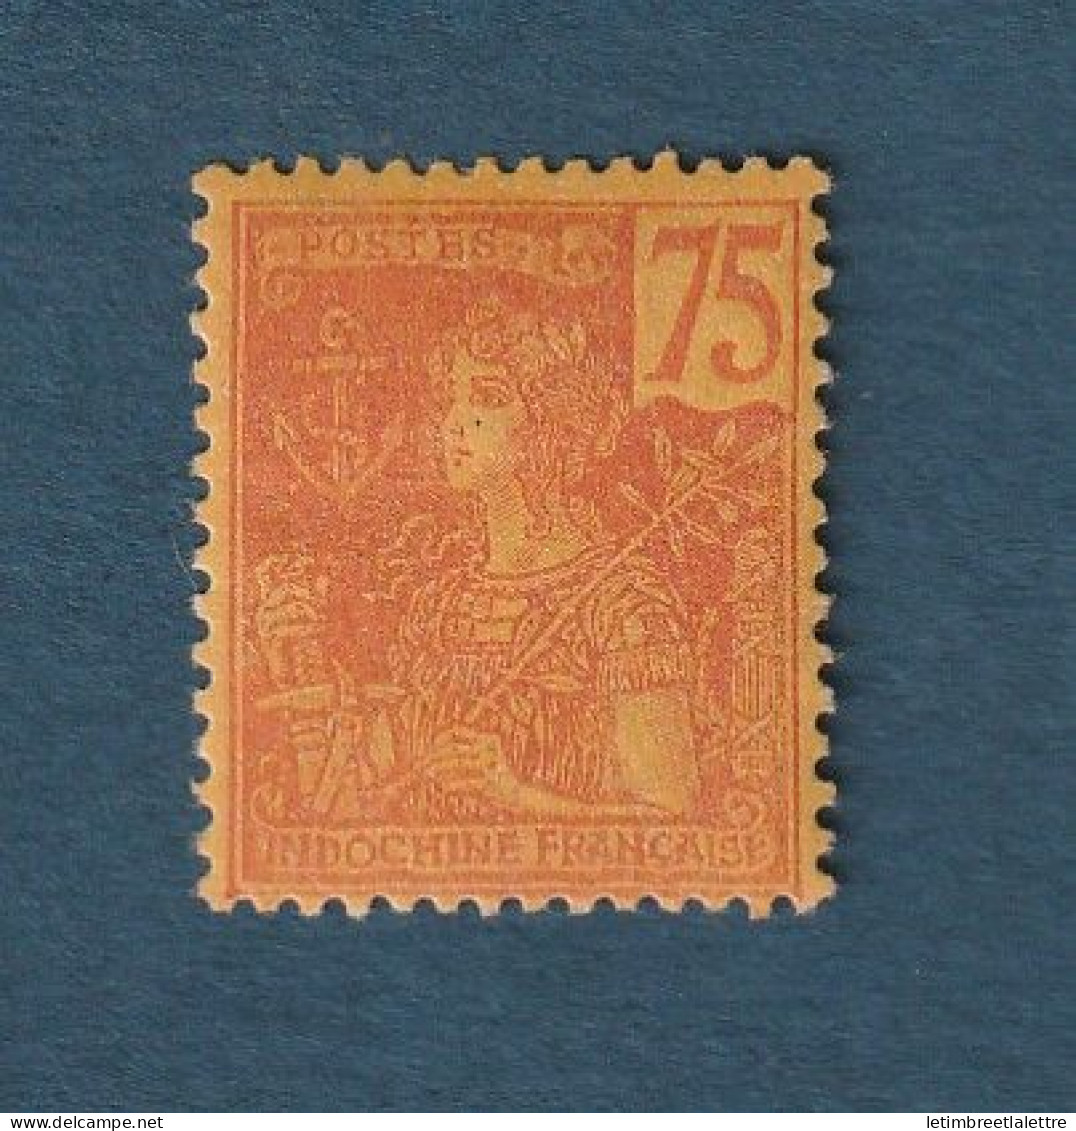 Indochine - YT N° 36 * - Neuf Avec Charnière - 1904 / 1906 - Unused Stamps